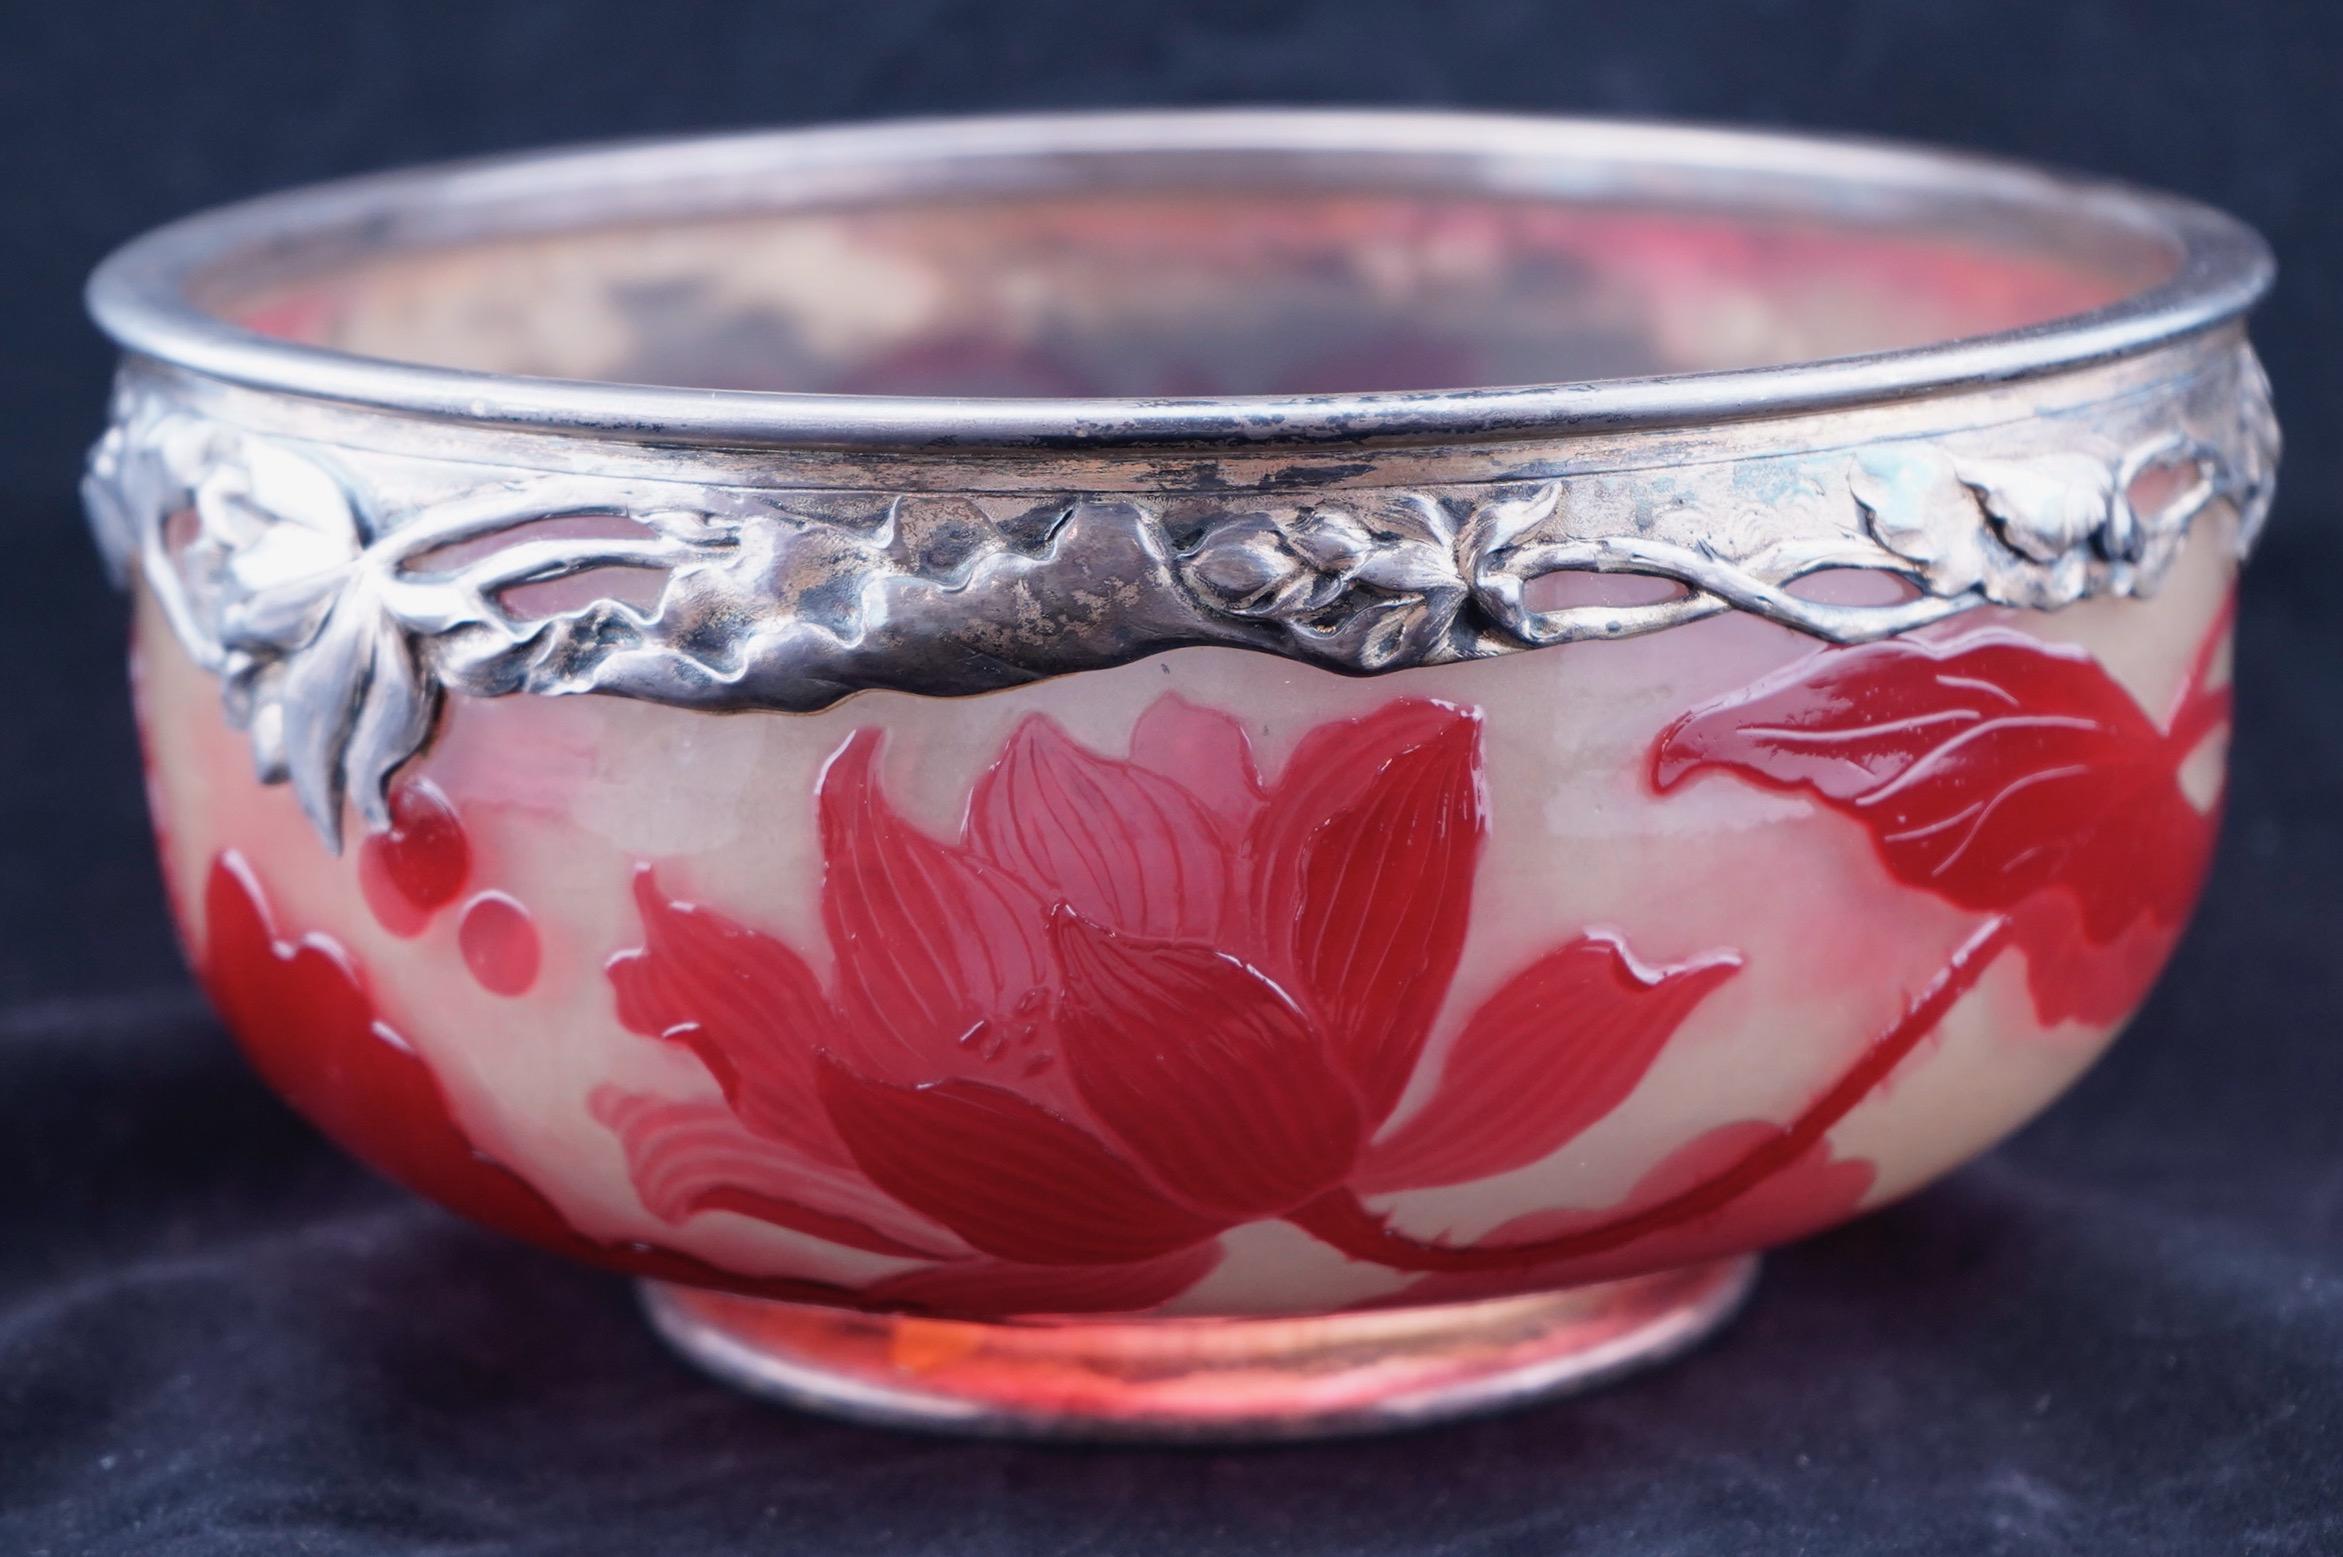 Emile Galle fire polished cameo glass floral bowl with period silver mounts. Signed in cameo with early Japanese style signature. The larger top mount marked with French silver hallmarks within design.